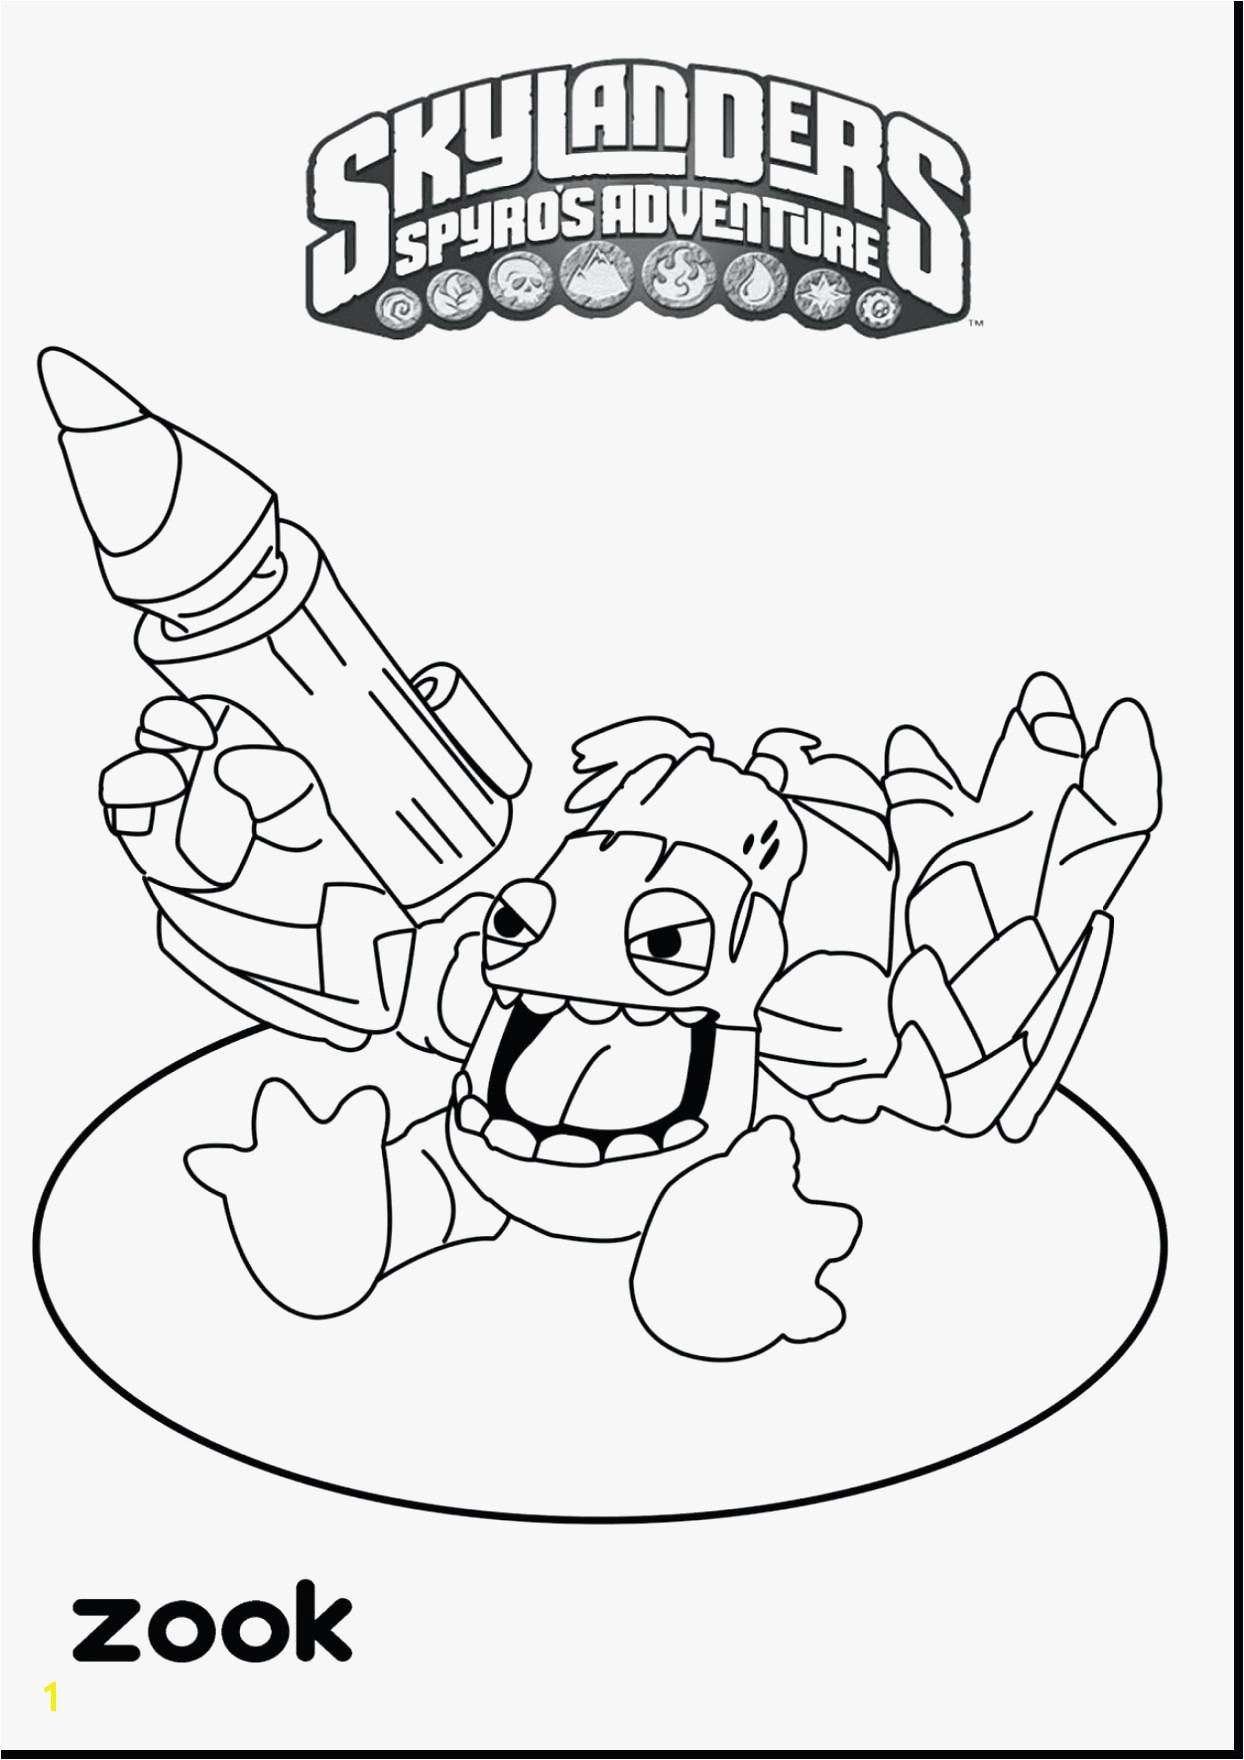 Duckbill Platypus Coloring Page 12 New Coloring Pages for Summer